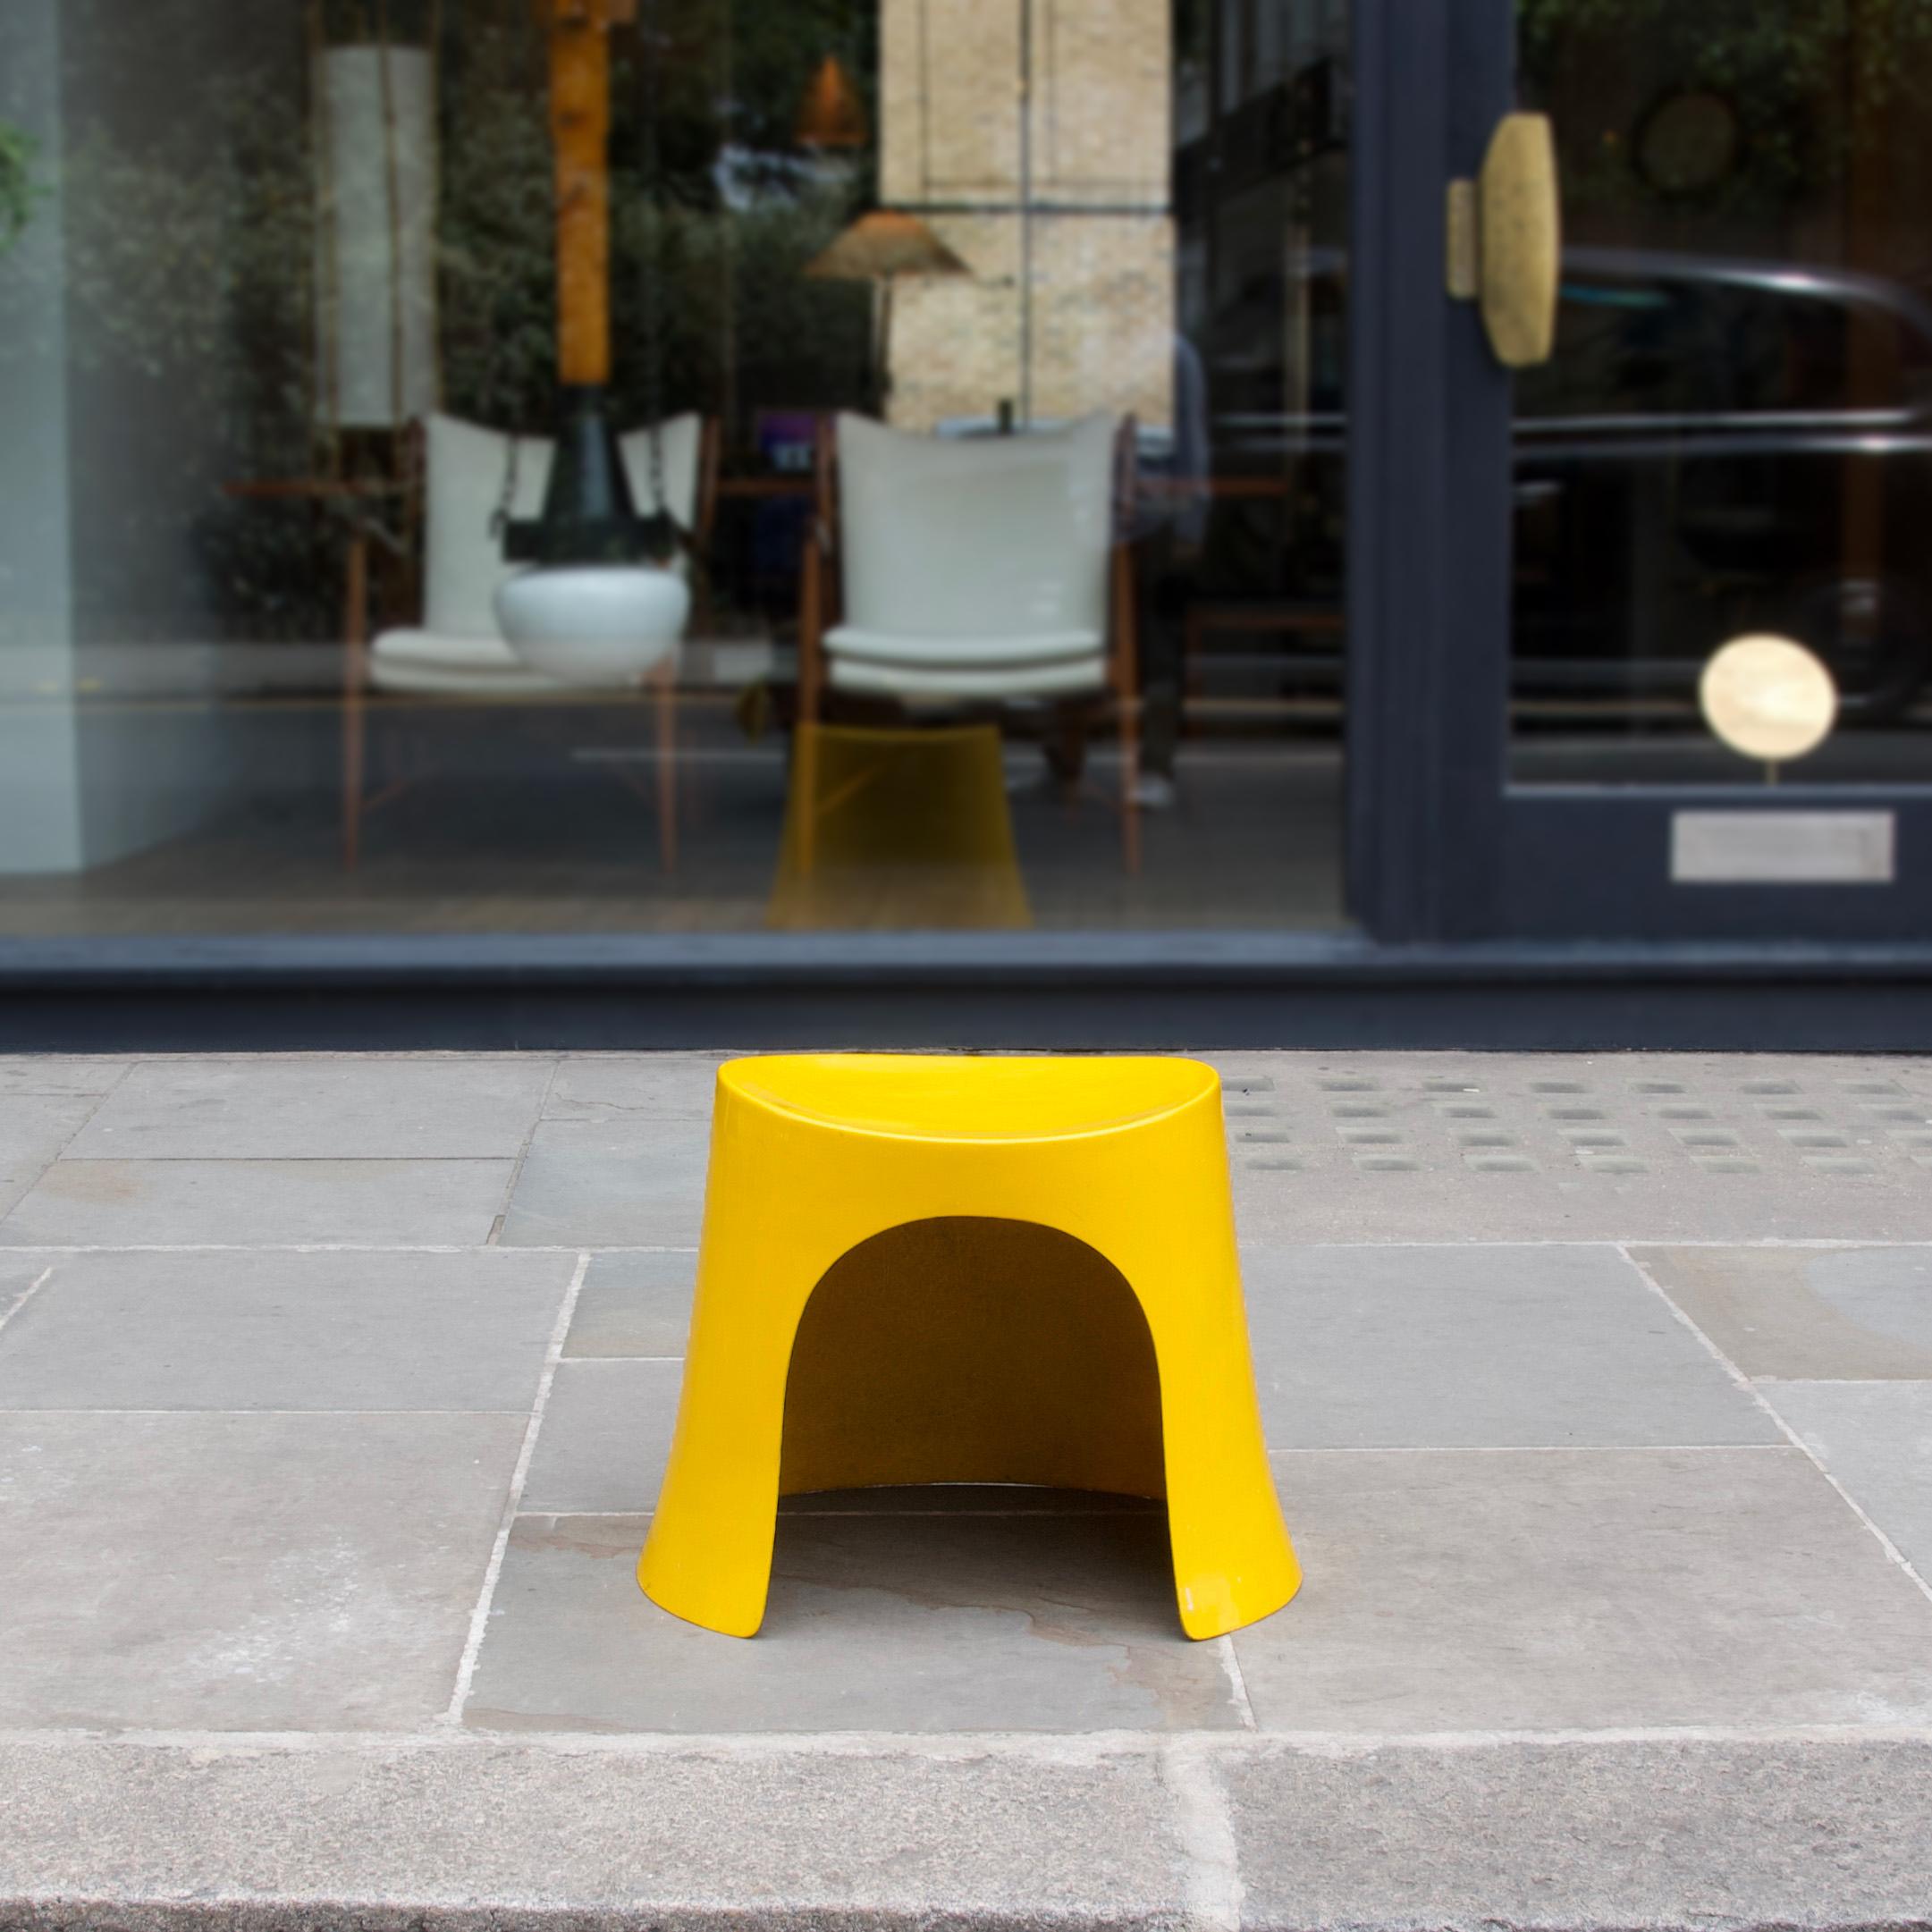 A vibrant yellow fibreglass stool designed by Nanna Ditzel for Domus Danica in 1969, after her move to London in 1968. In every aspect the stool is heavily influenced by the vitality of the 1960s -the space race, material/technical innovations, as